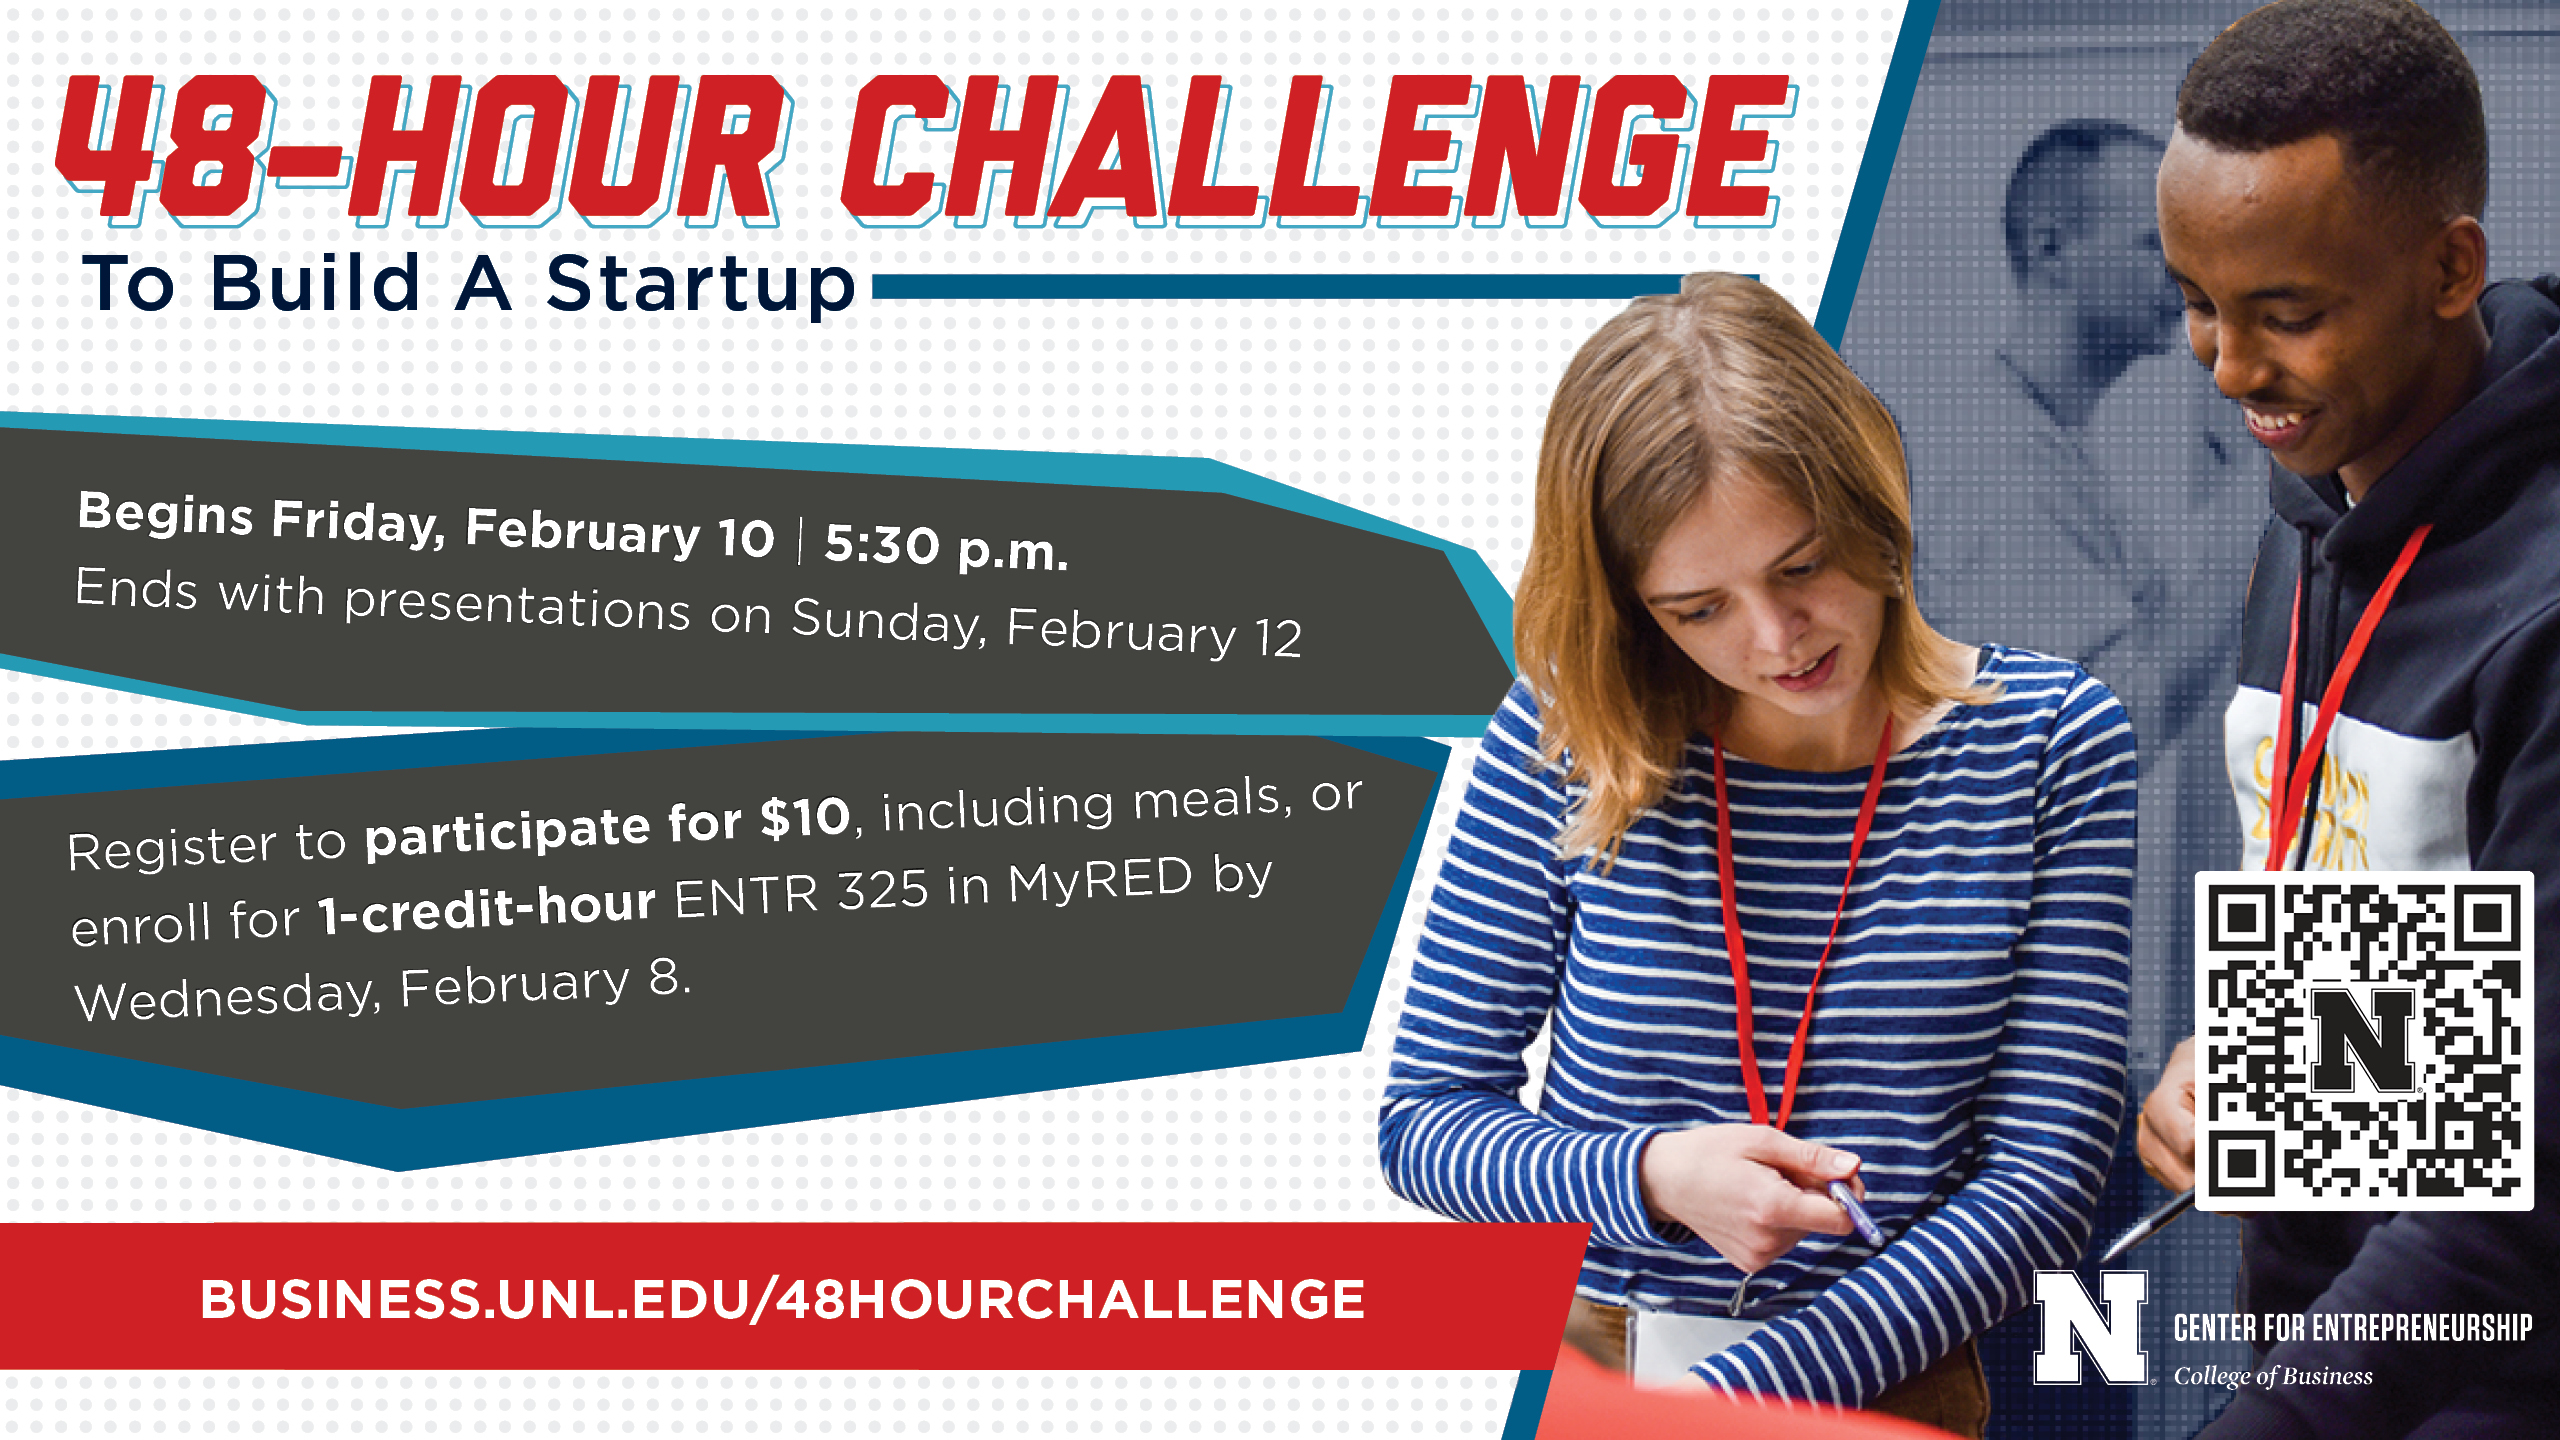 48-Hour Challenge to Build a Startup begins Friday. Feb. 10. Participate for $10, including meals, or enroll for 1 credit ENTR 325